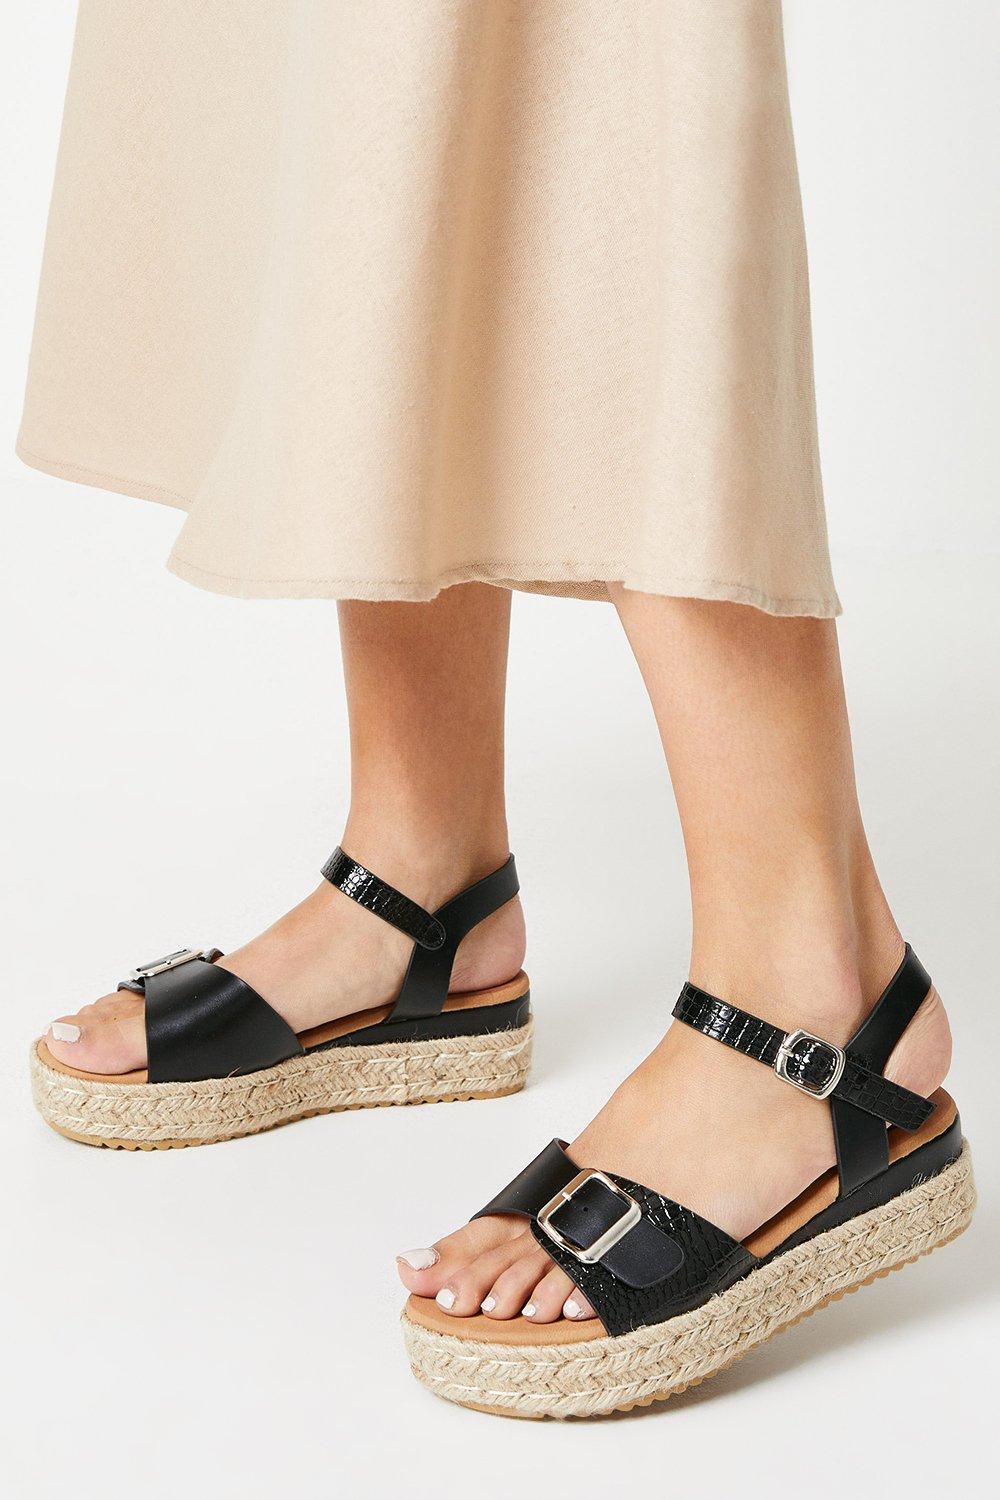 Womens Good For The Sole: Marta Comfort Buckle Detail Mix Material Flatform